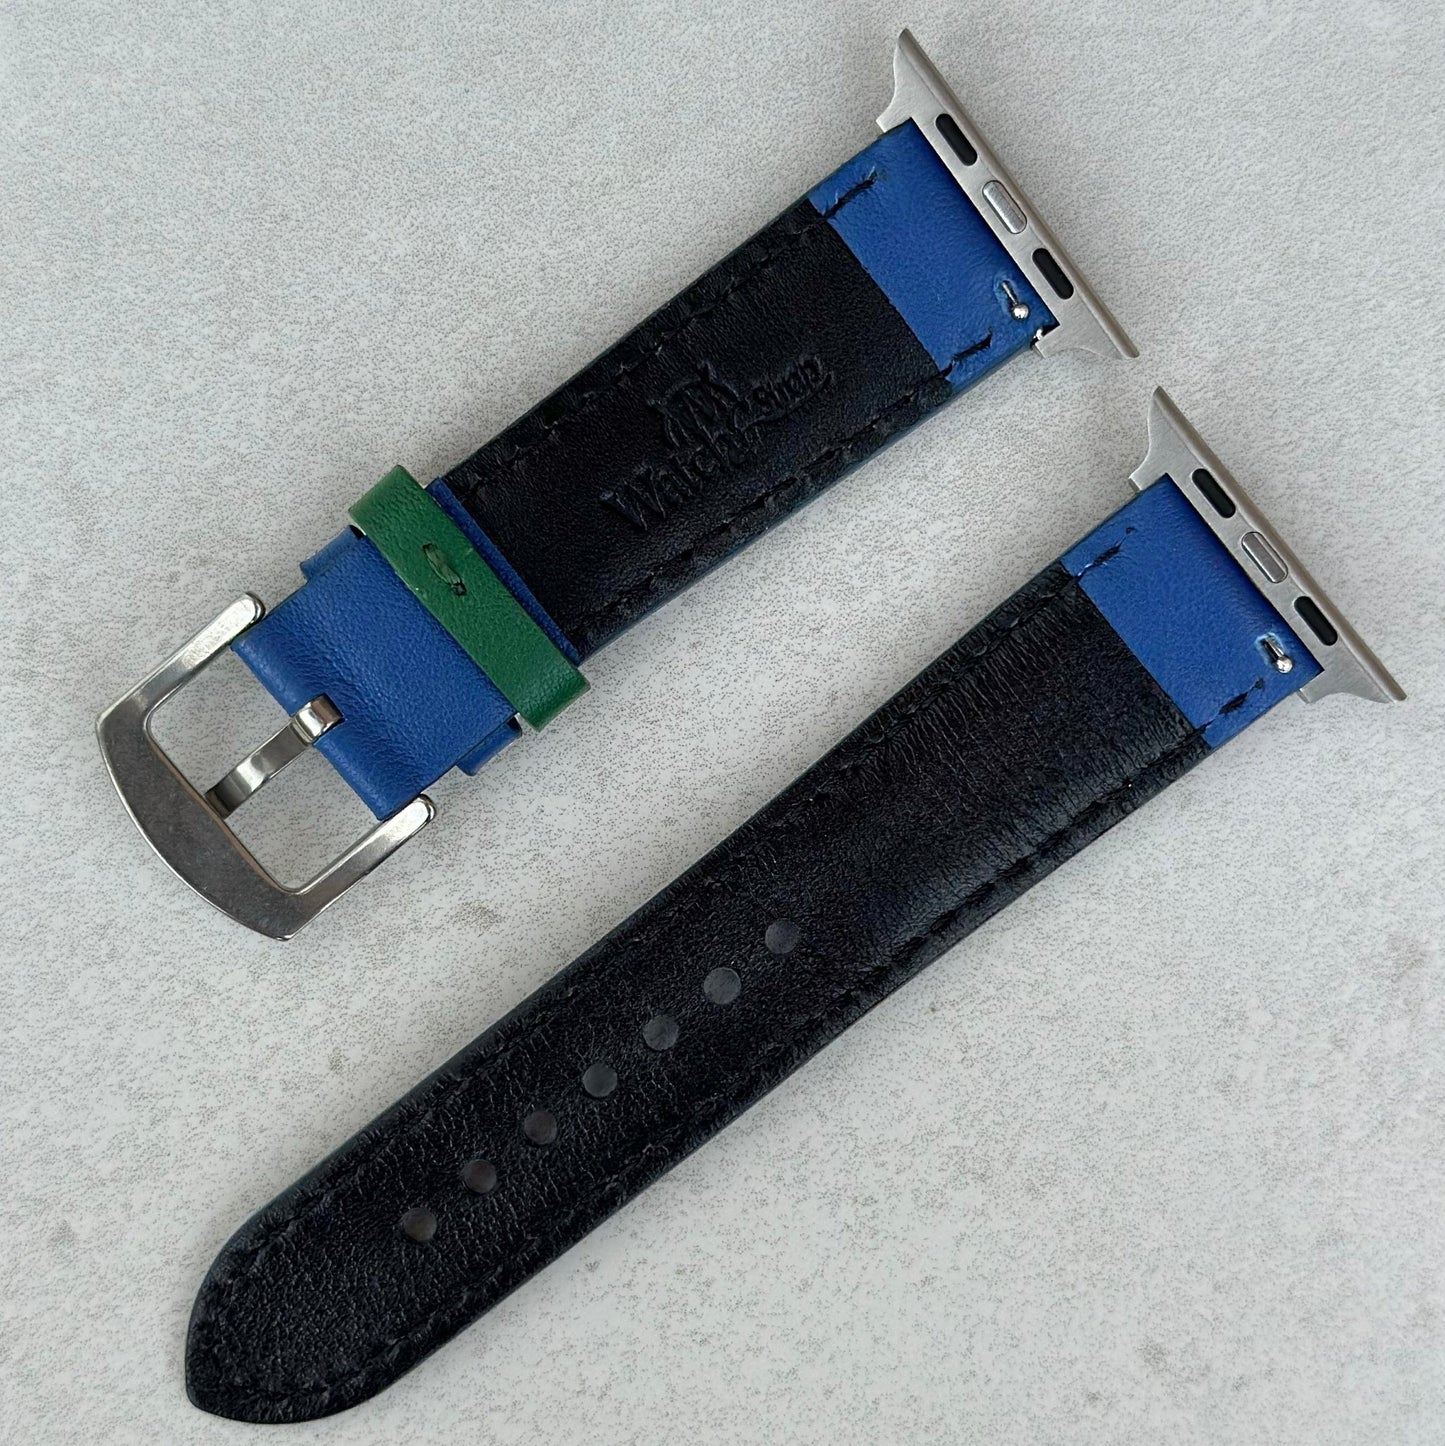 Rear of the Le Mans blue and green apple watch strap. Watch And Strap logo debossed into the rear of the strap.